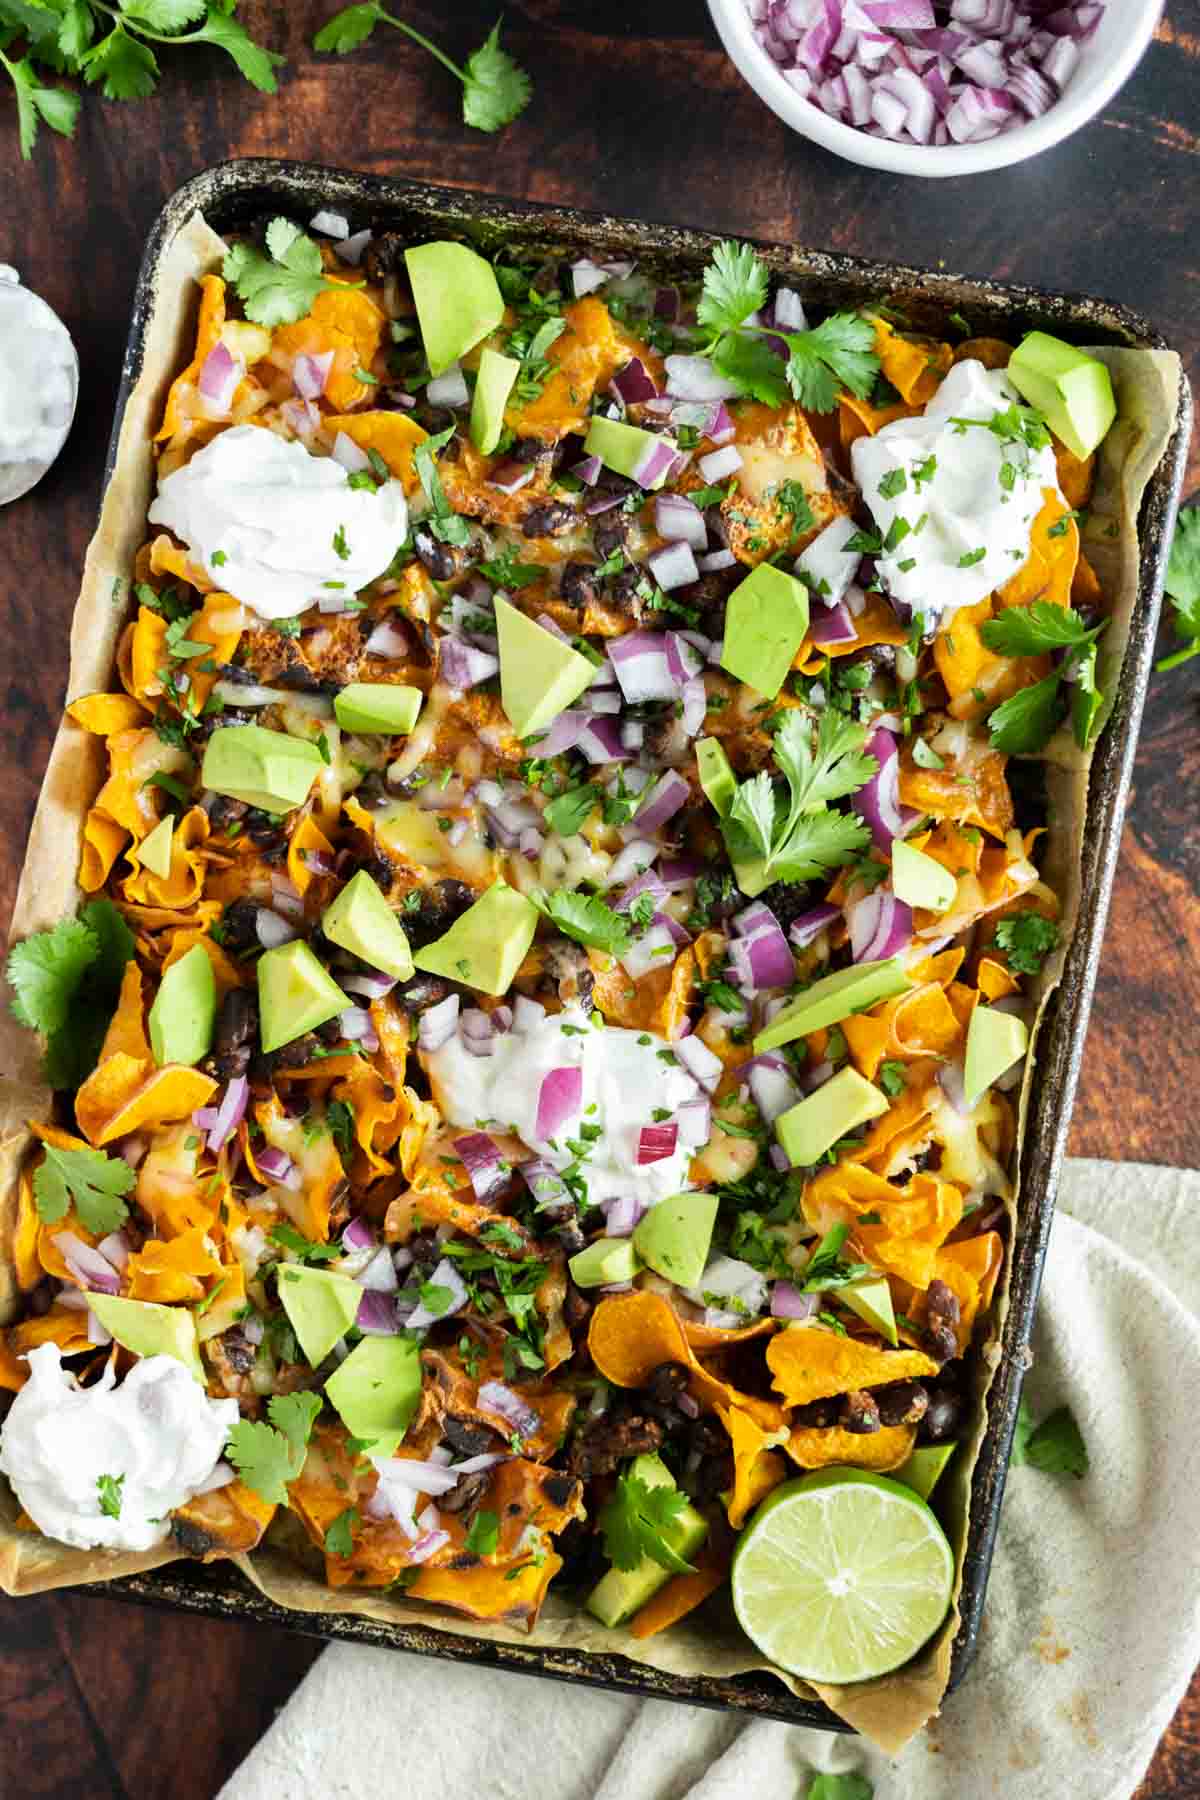 Nachos on a tray loaded with toppings.